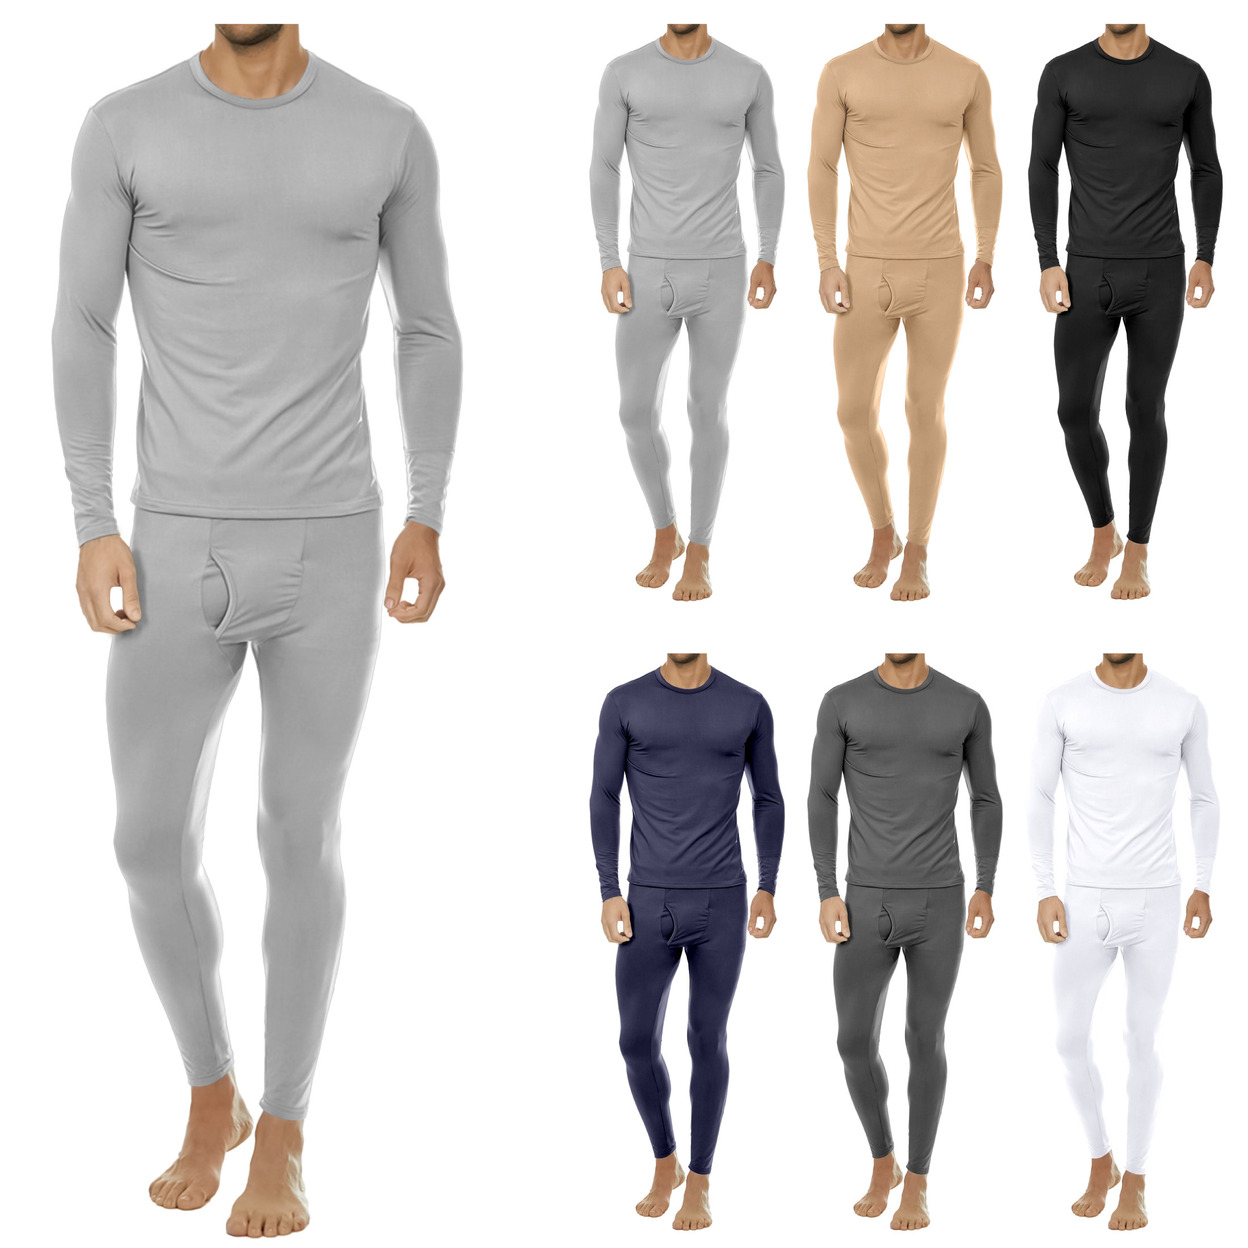 2-Sets: Men's Winter Warm Fleece Lined Thermal Underwear Set For Cold Weather - Grey&white, X-large